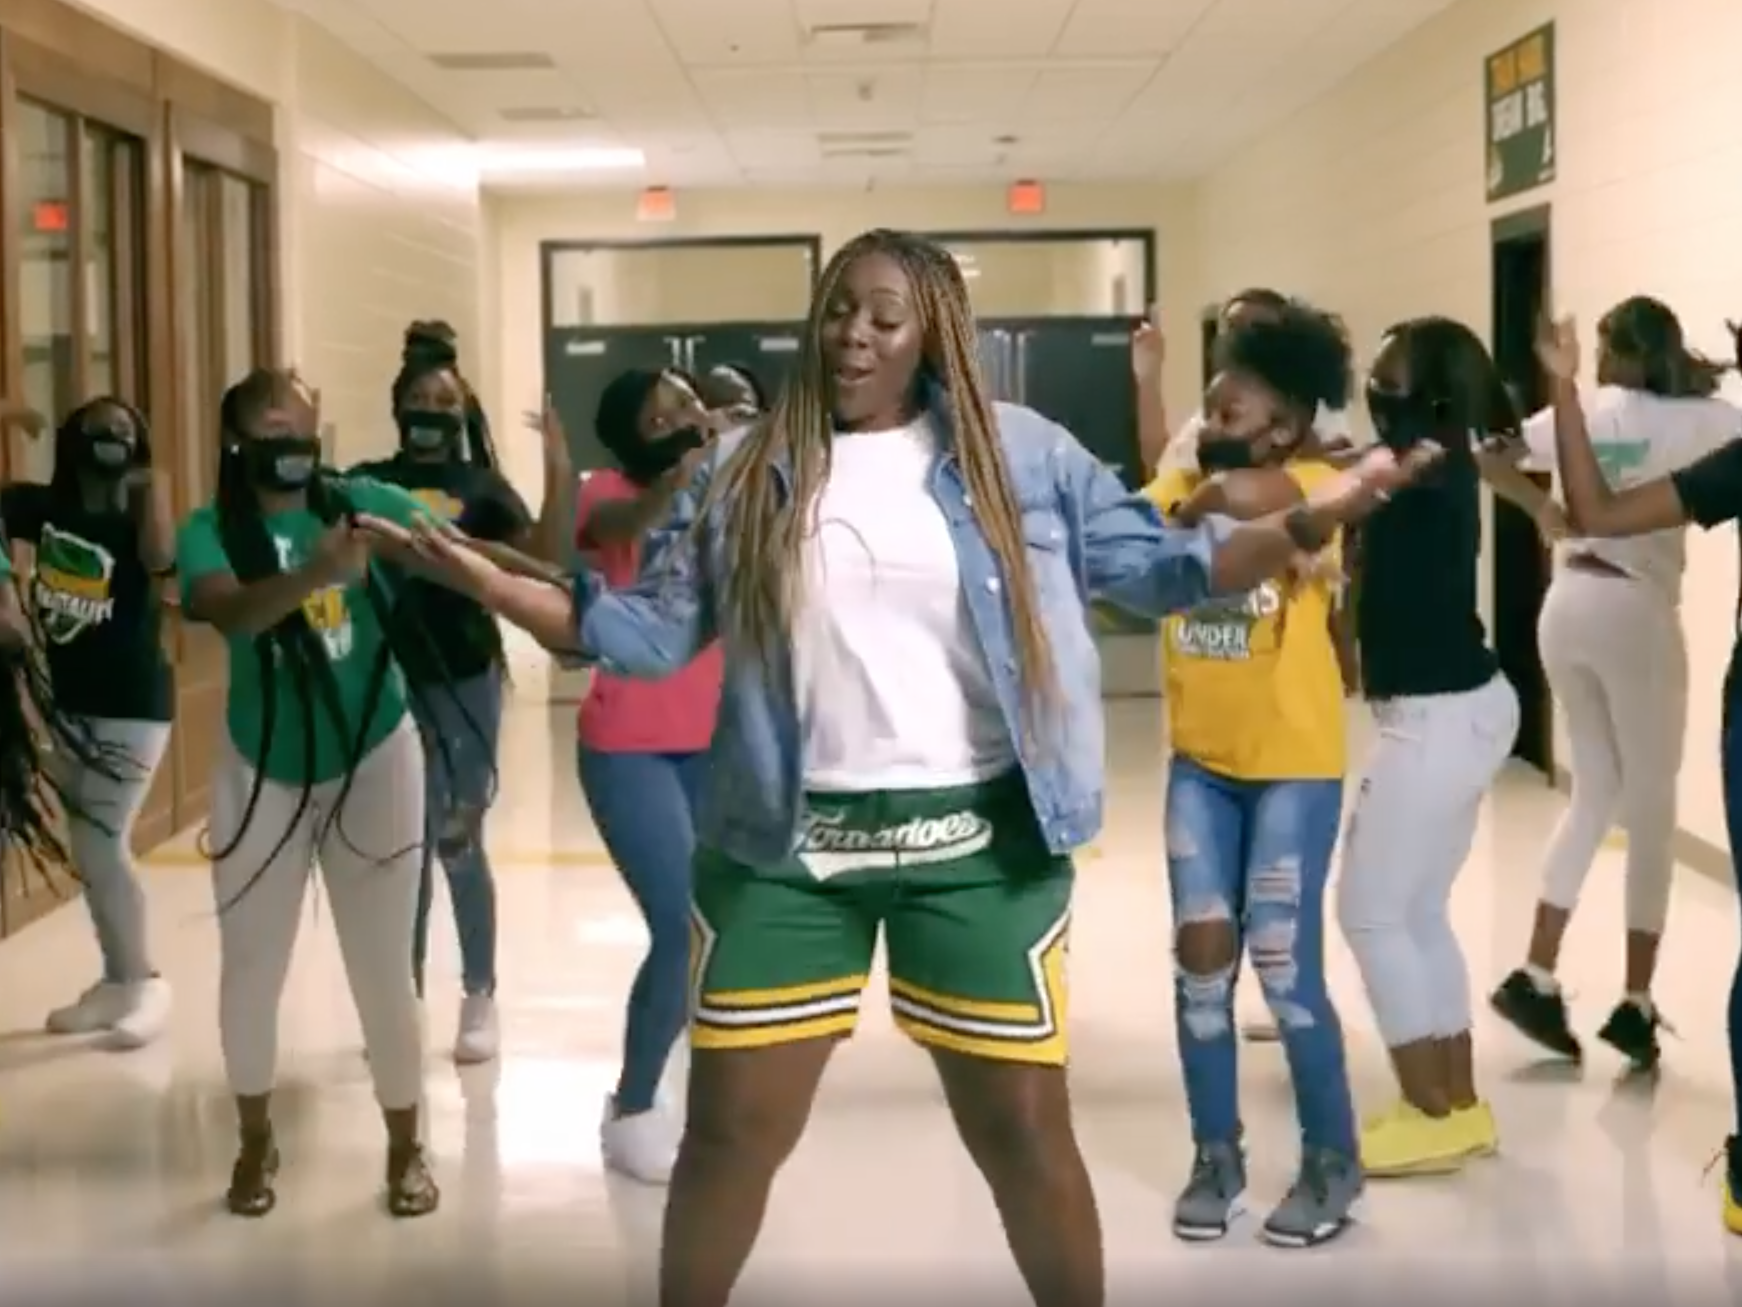 Teachers' BackToSchool Rap About Virtual Learning Goes Viral